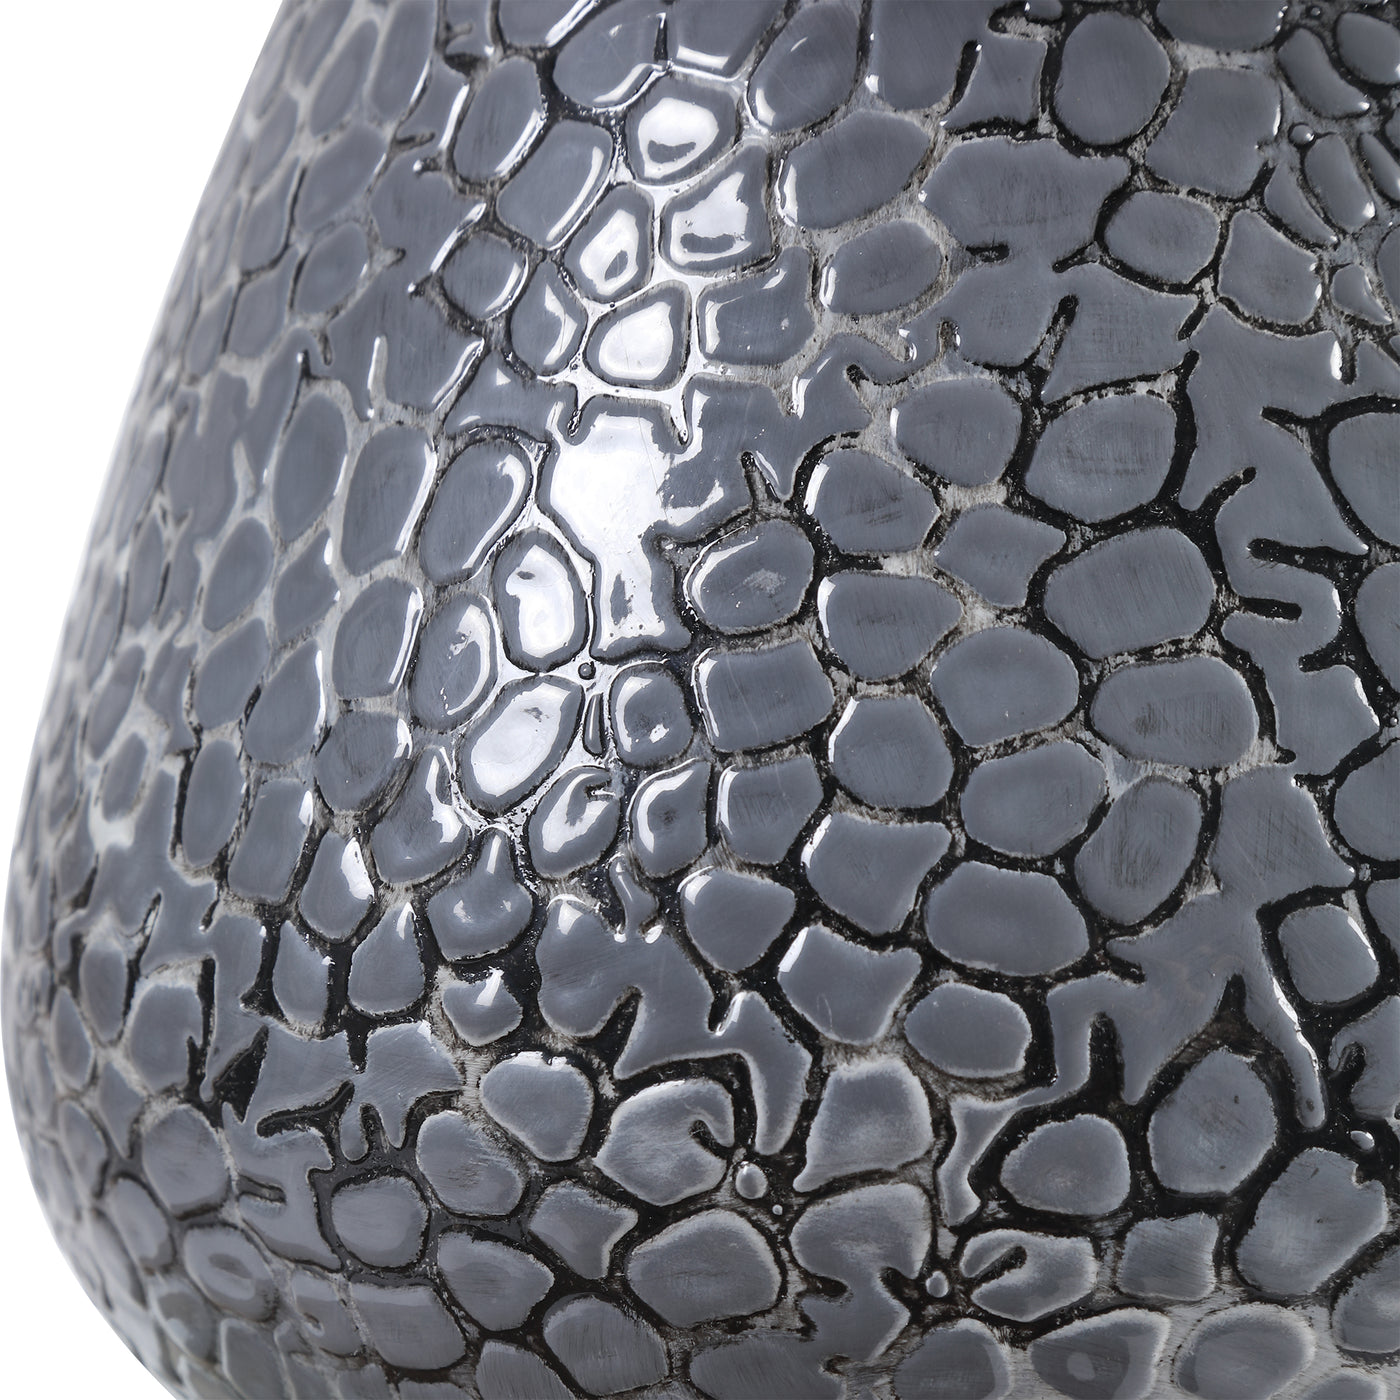 Reminiscent Of Natural River Stones, This Table Lamp Showcases An Embossed Textured Ceramic Base In A Metallic Charcoal Gr...